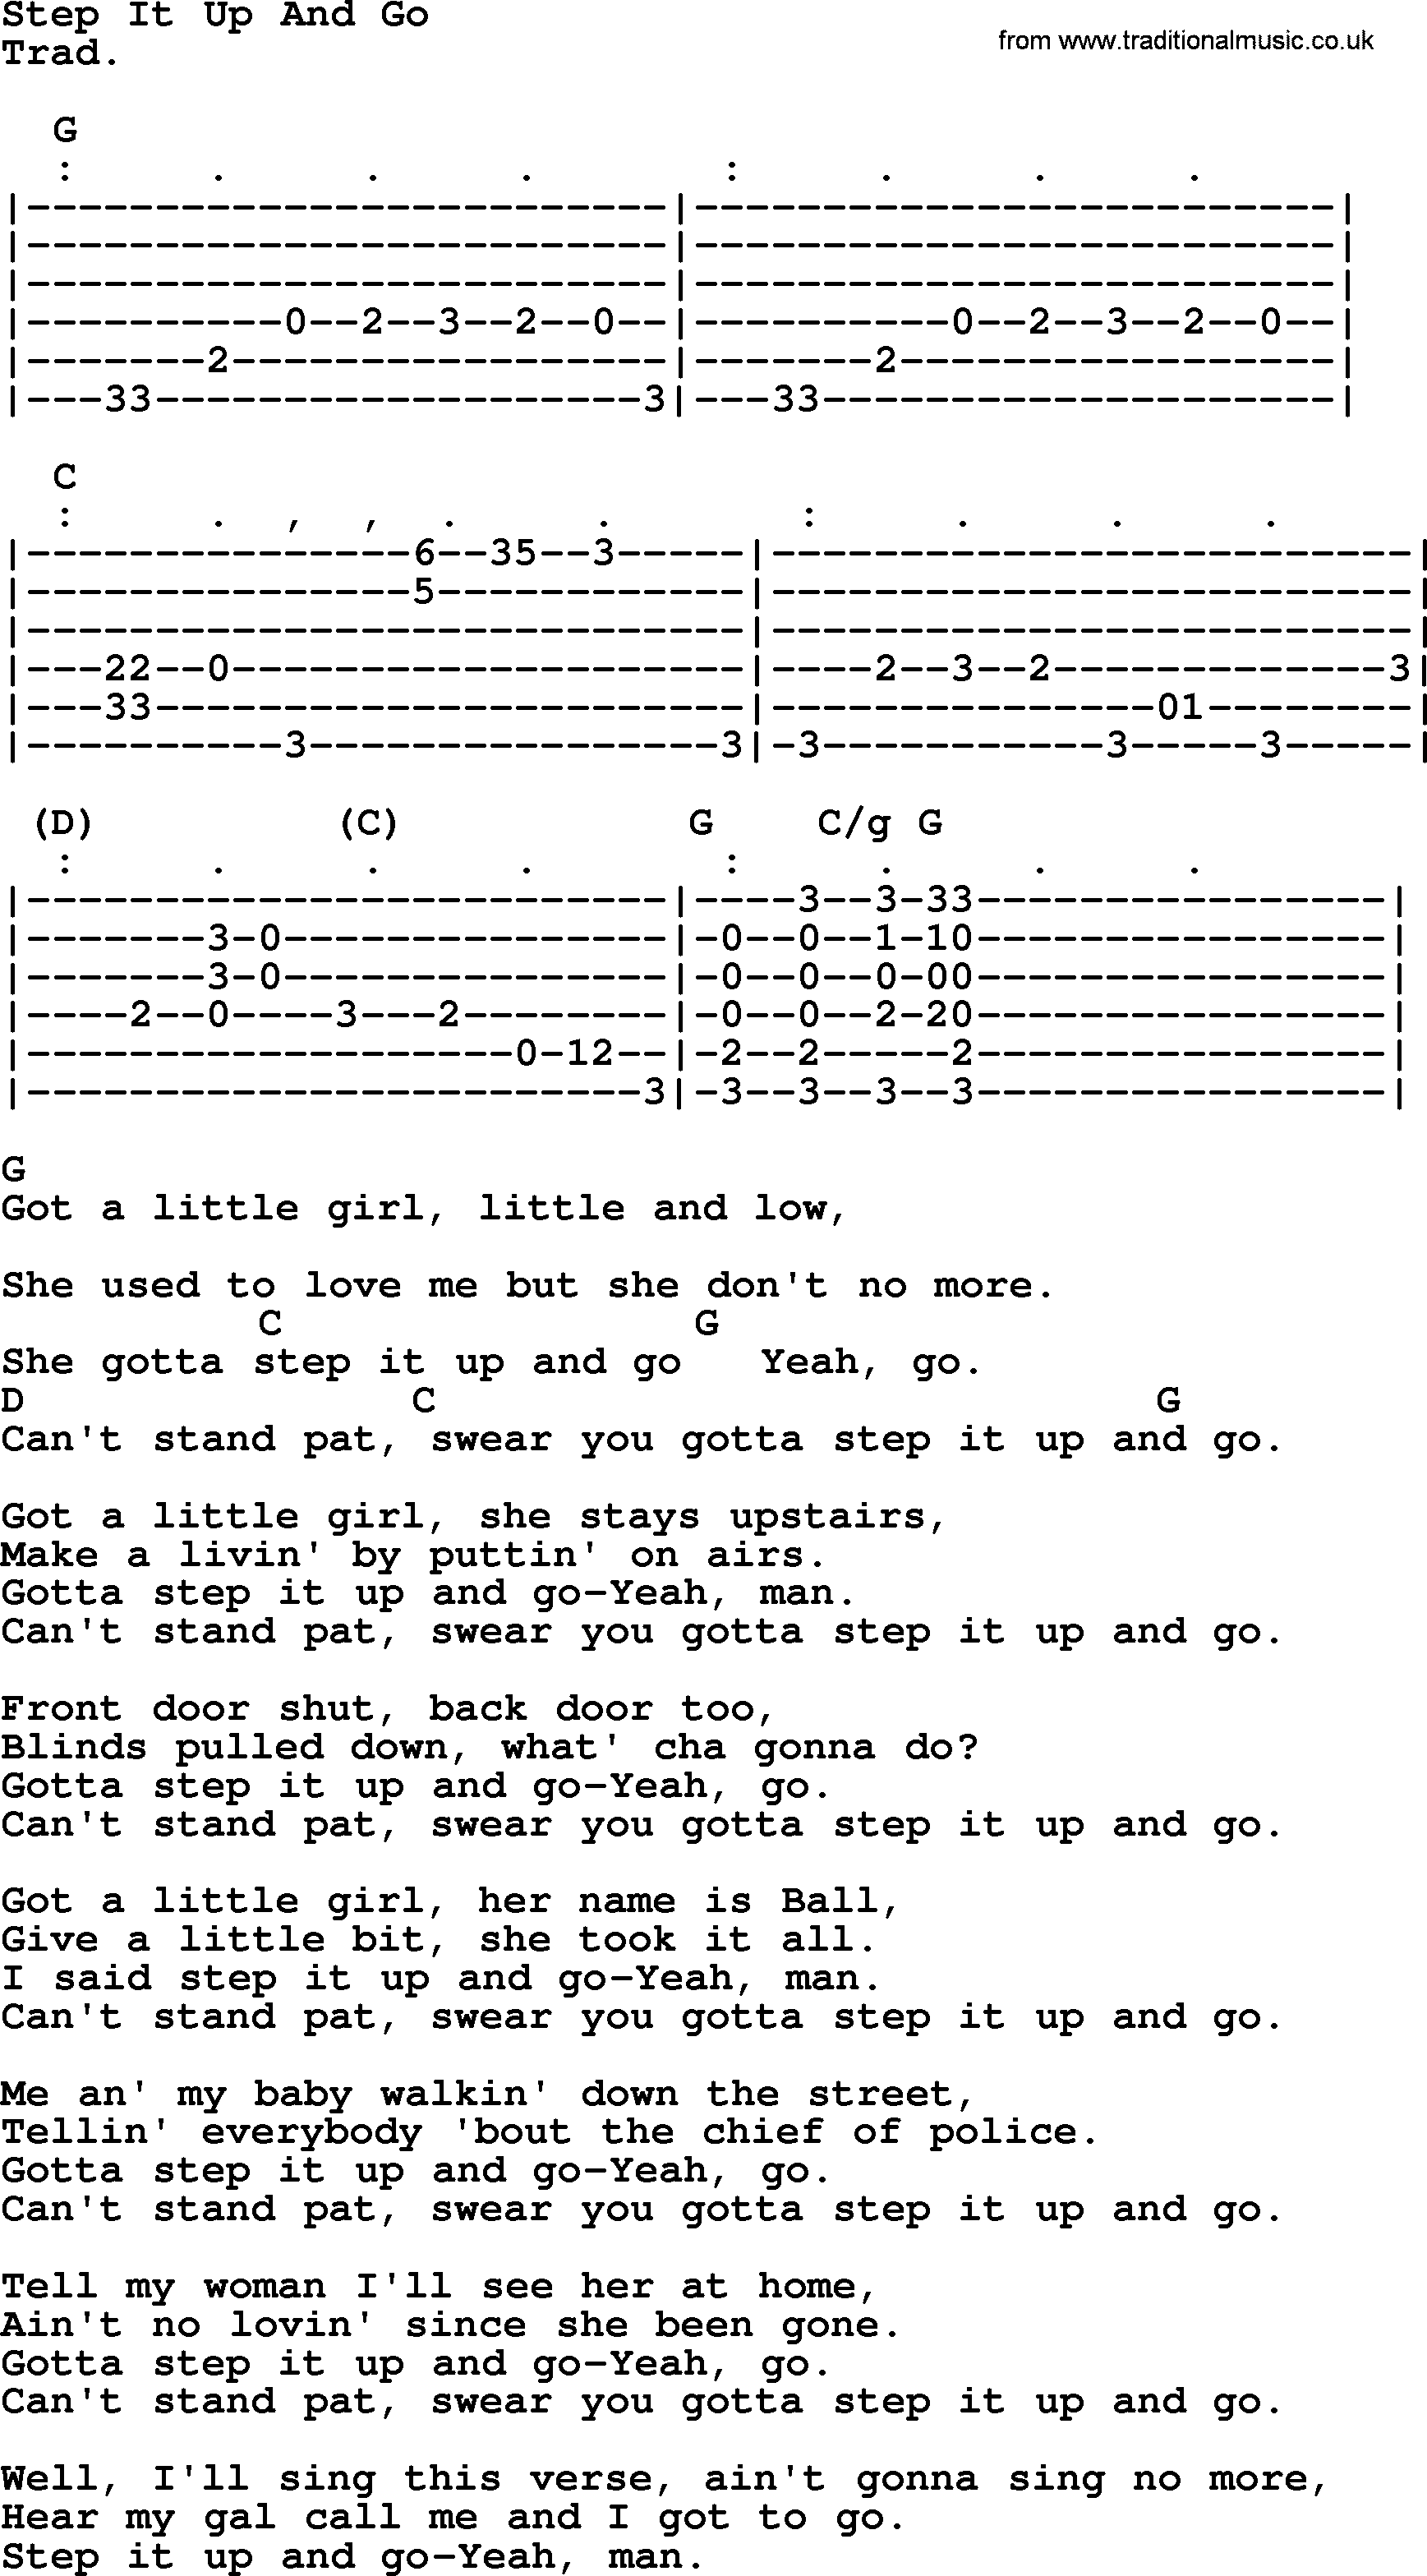 Top 1000 Most Popular Folk and Old-time Songs: Step It Up And Go, lyrics and chords